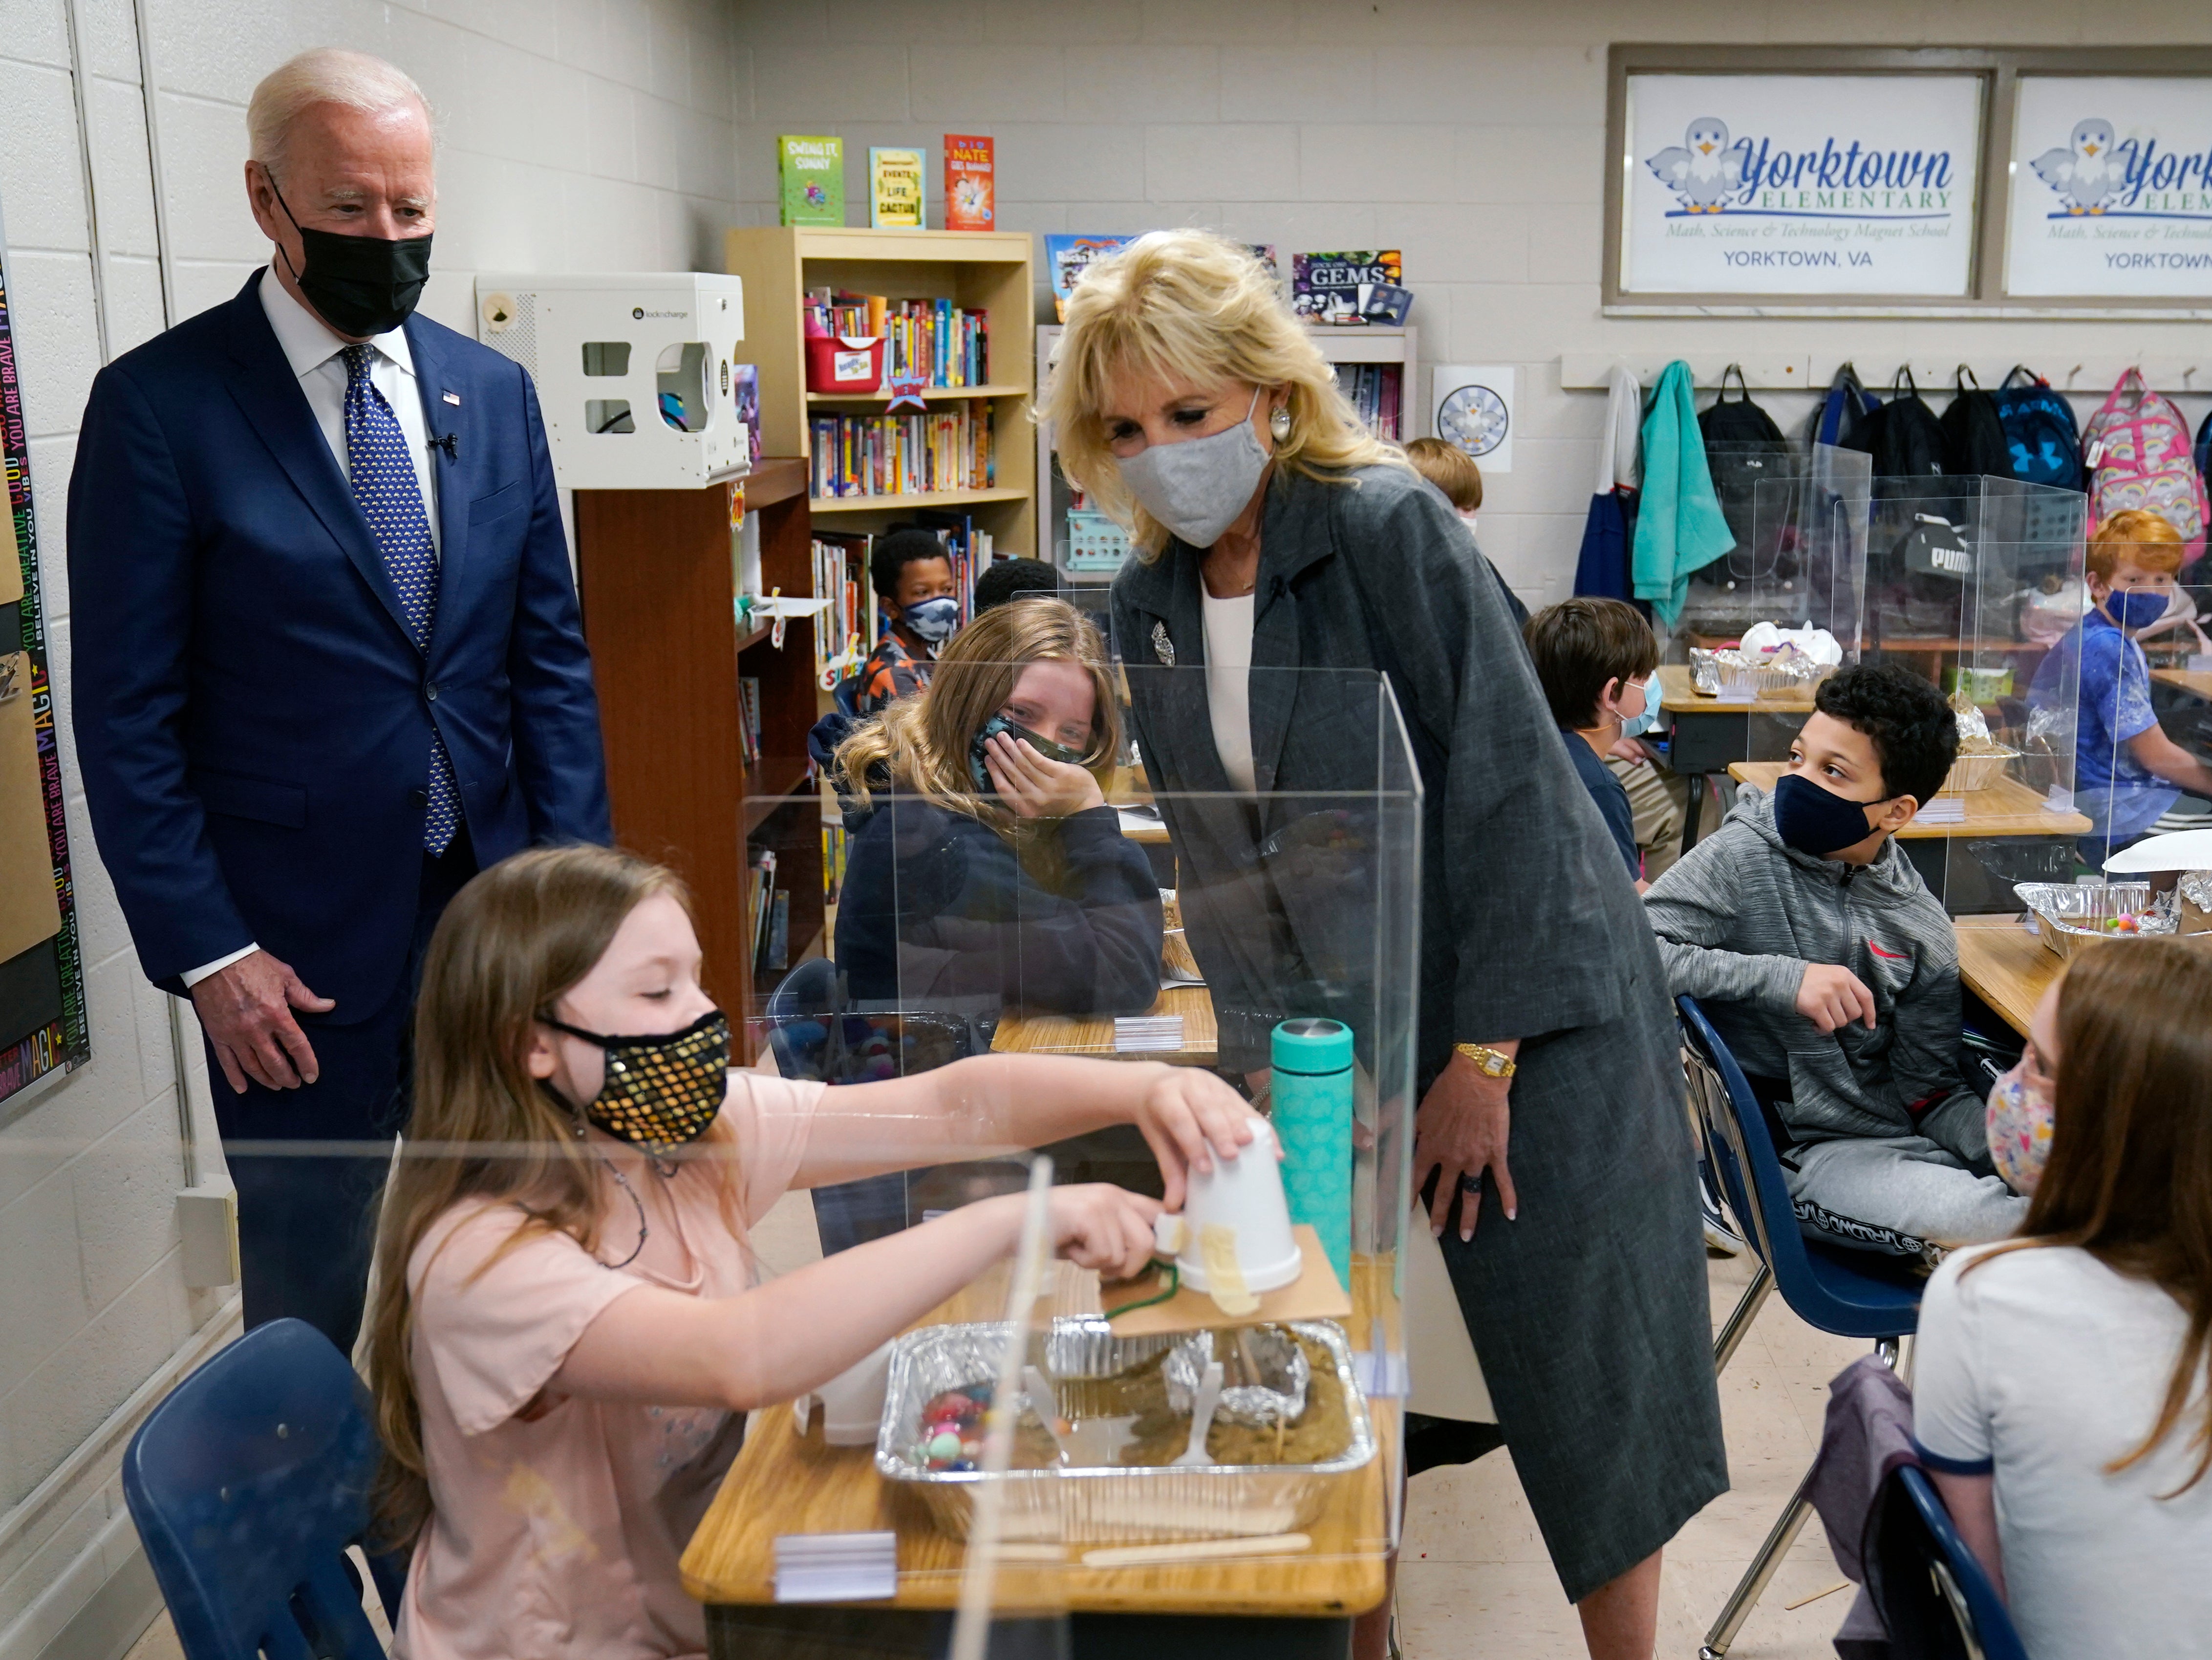 President Joe Biden and first lady Jill Biden watch a student demonstrate her project during a visit to Yorktown Elementary School, on Monday, May 3, 2021, in Yorktown, Virginia.